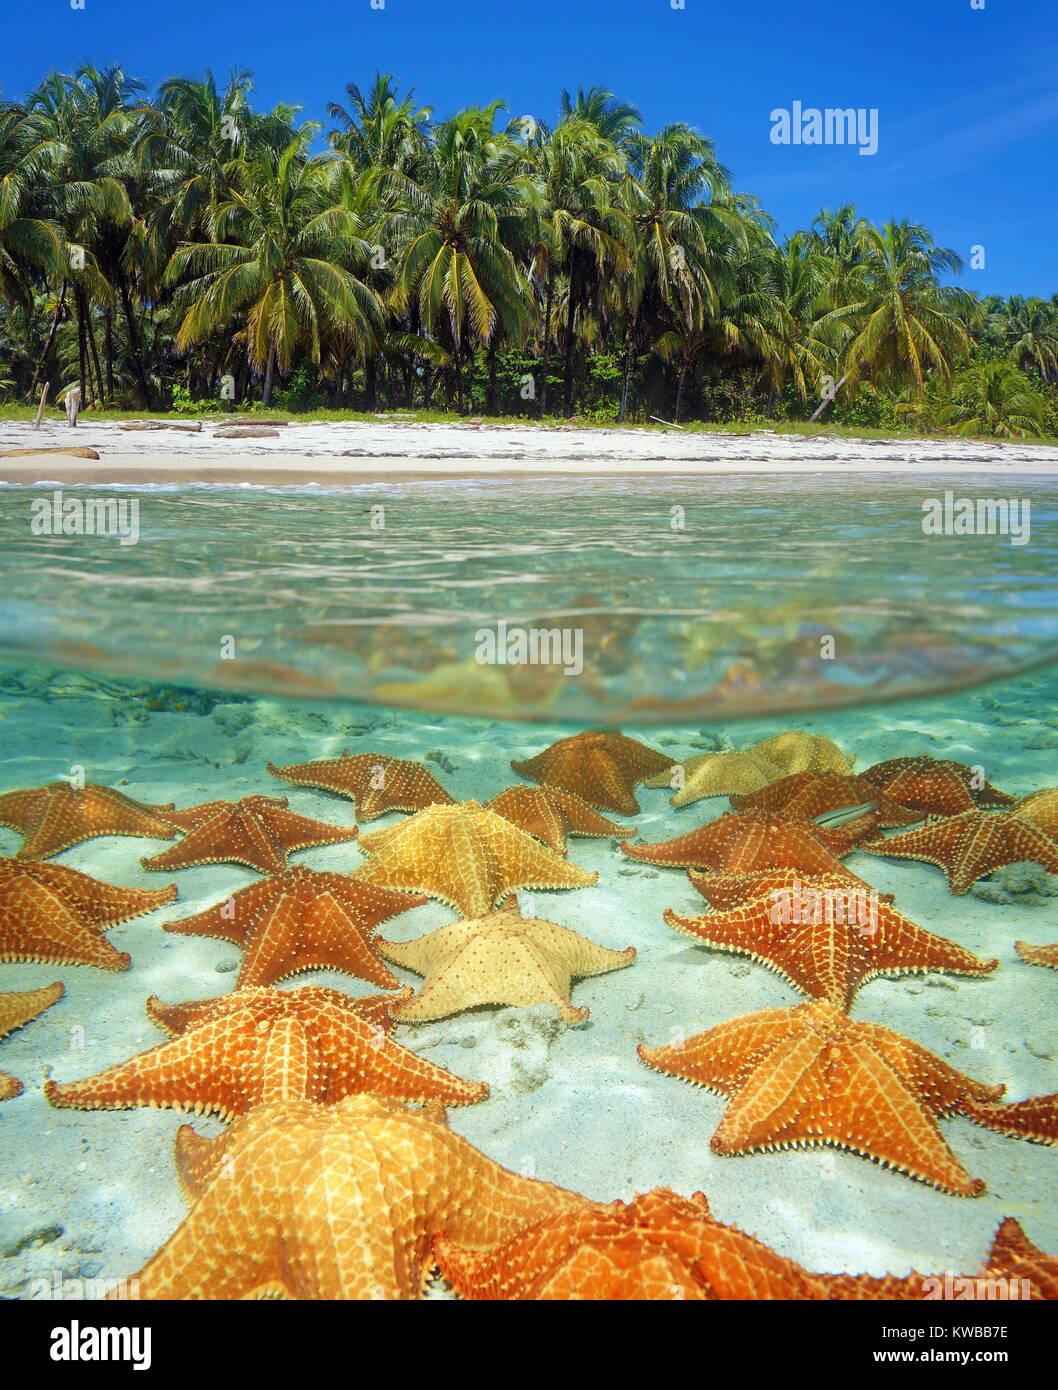 Over and under sea surface near the shore of a tropical beach with coconut trees and many starfishes underwater on a sandy seafloor, Caribbean Stock Photo